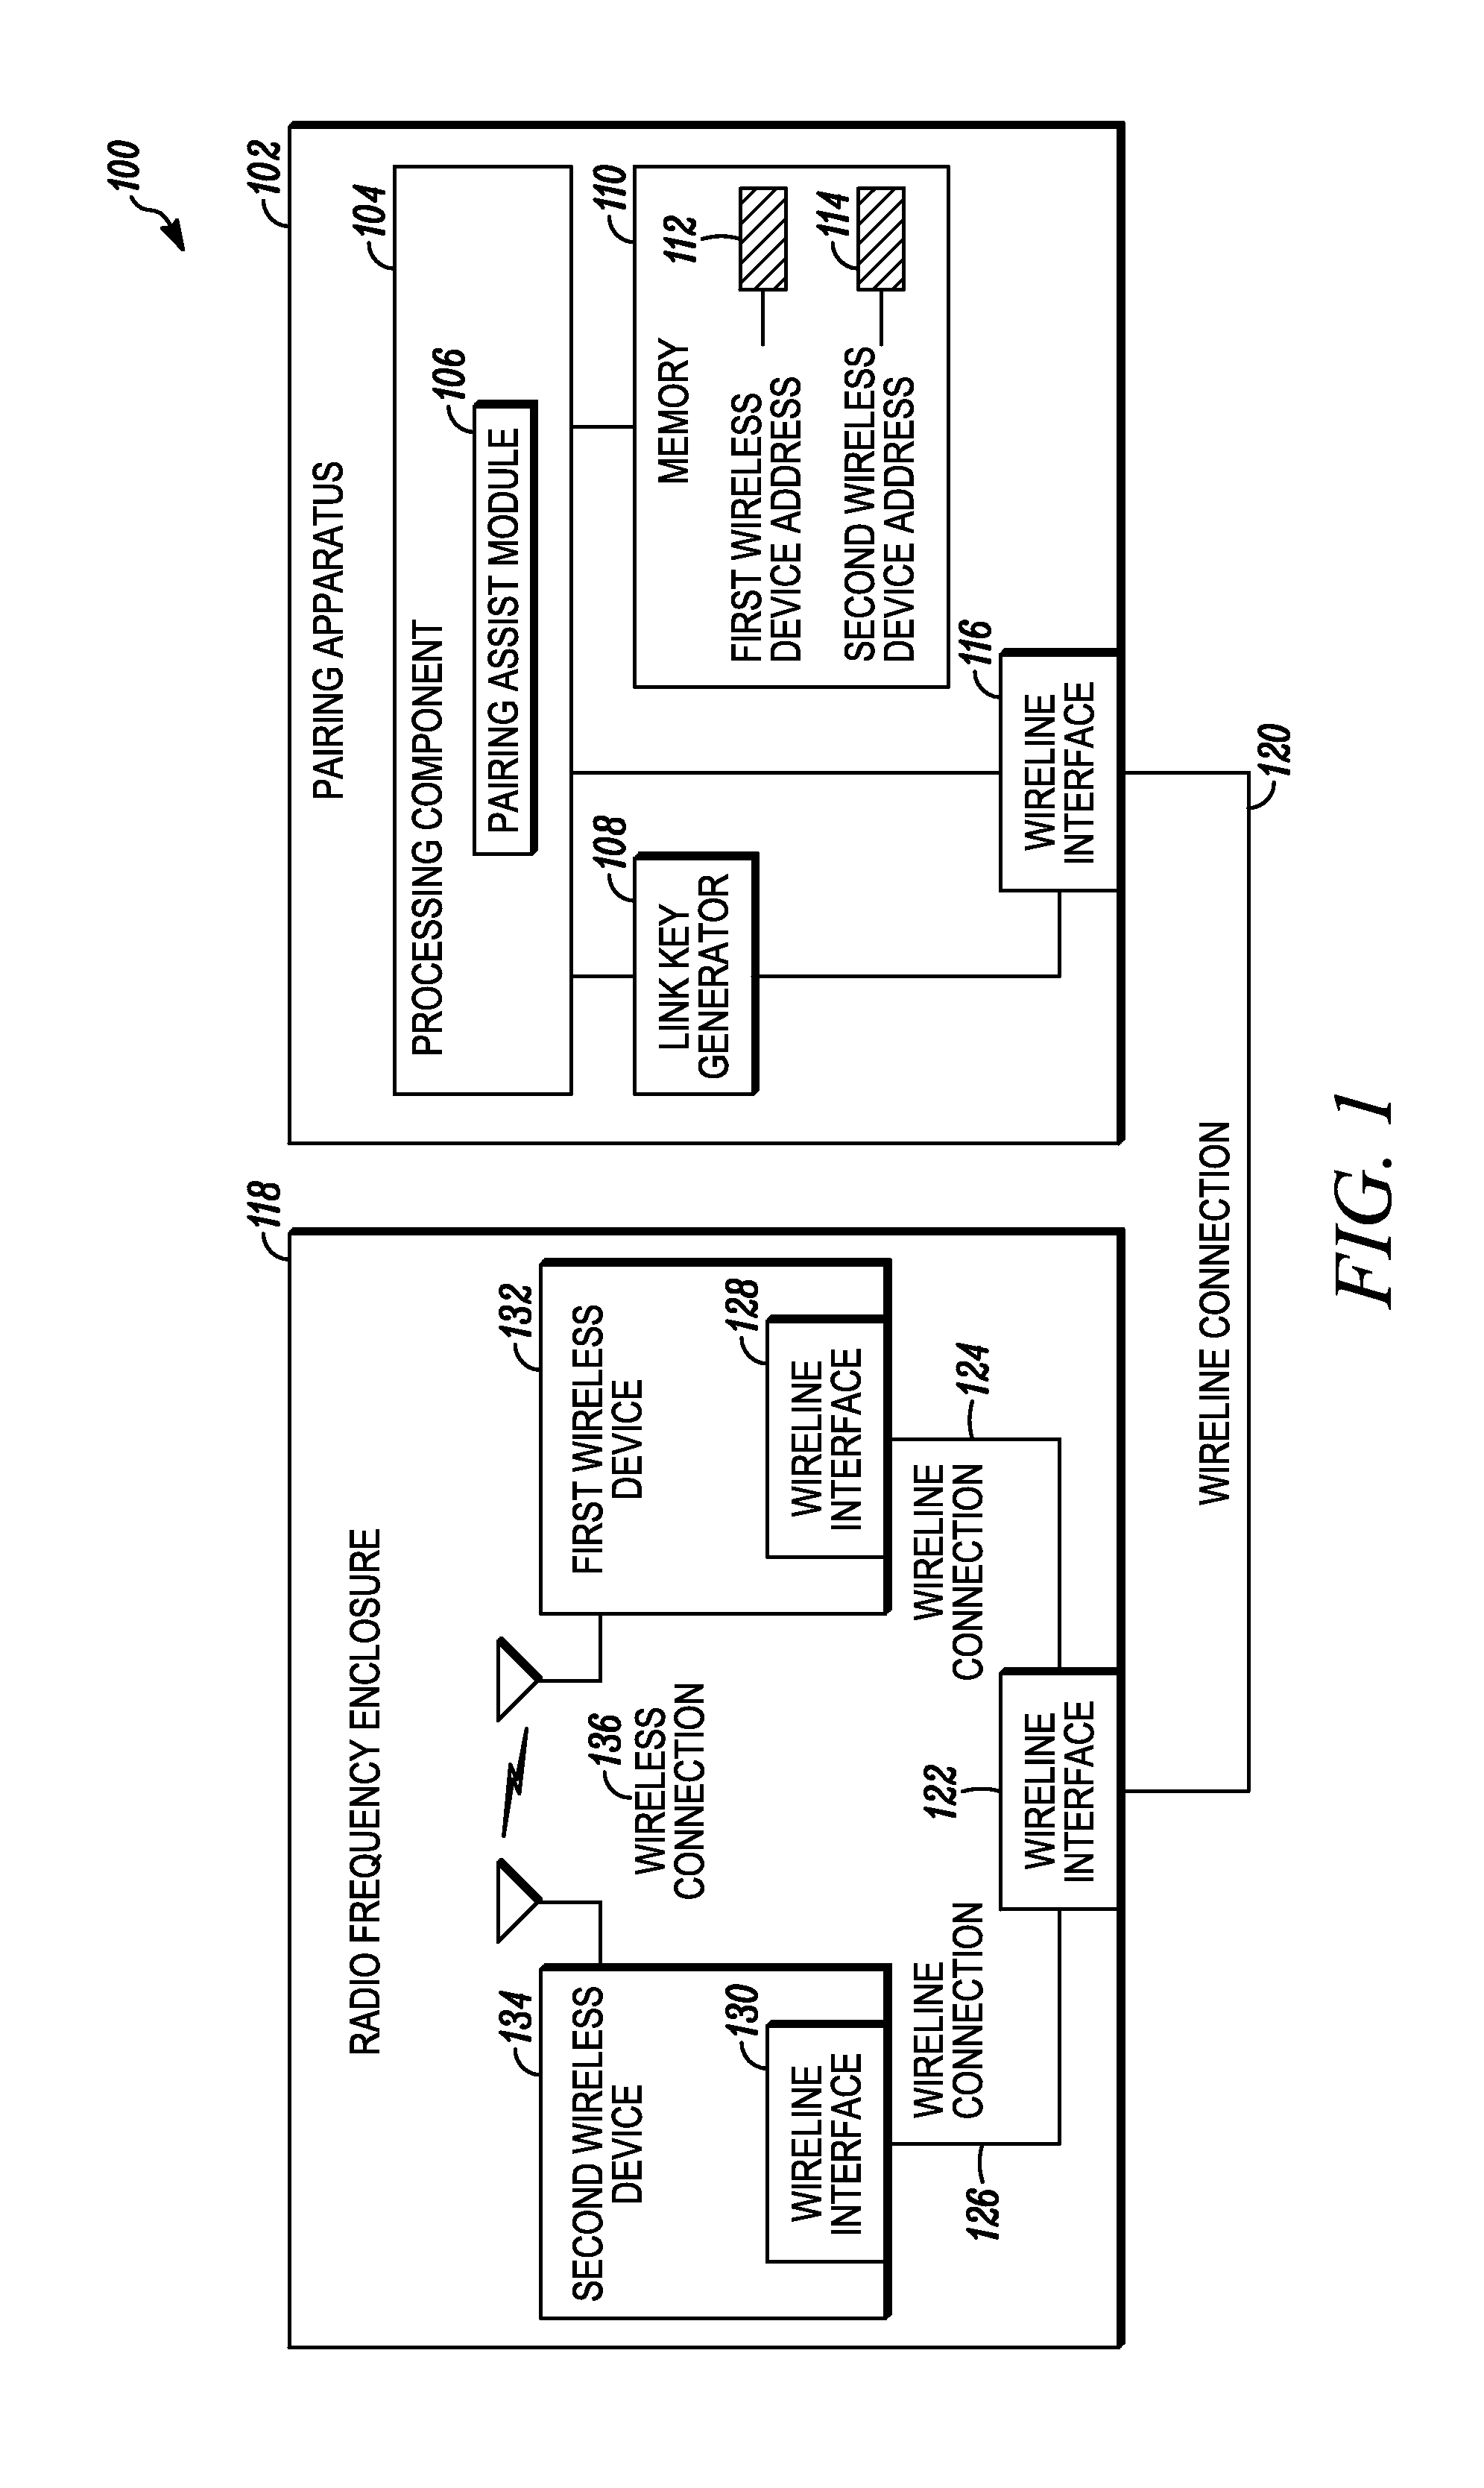 Method and apparatus to facilitate pairing between wireless devices